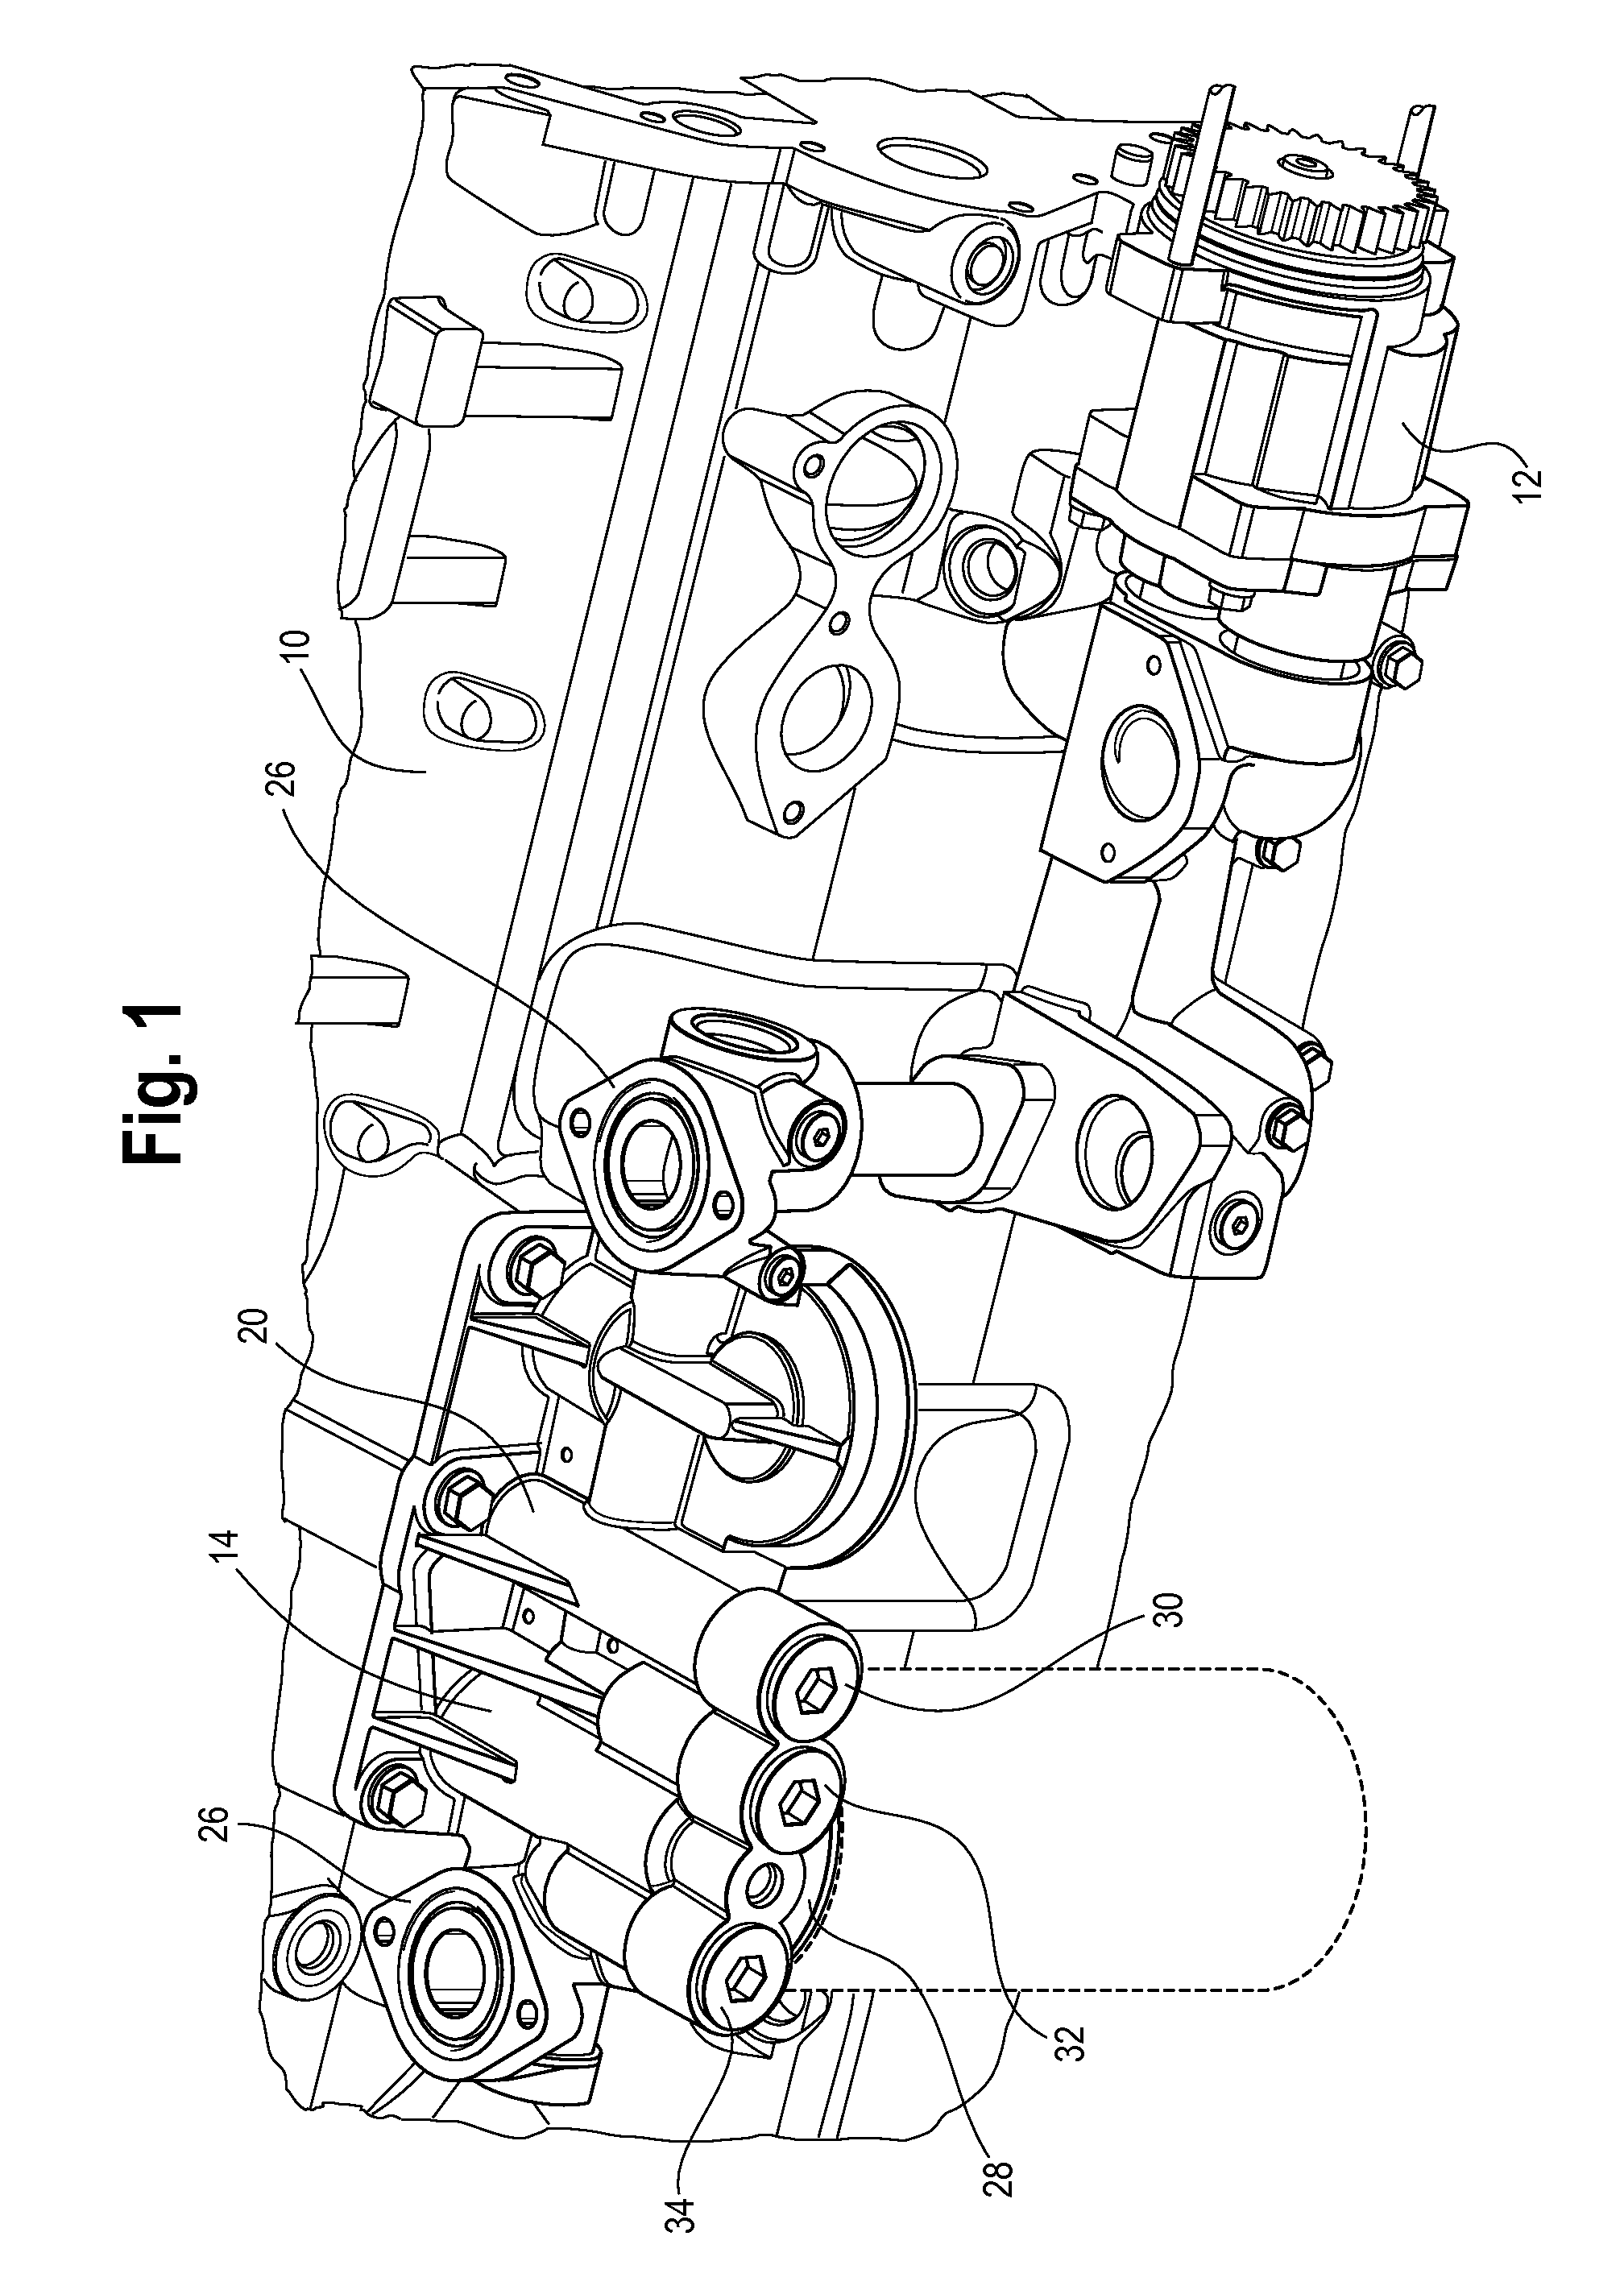 Apparatus and Method for Replacing an Oil Pressure Regulating Assembly and a High Pressure Relief Valve Assembly